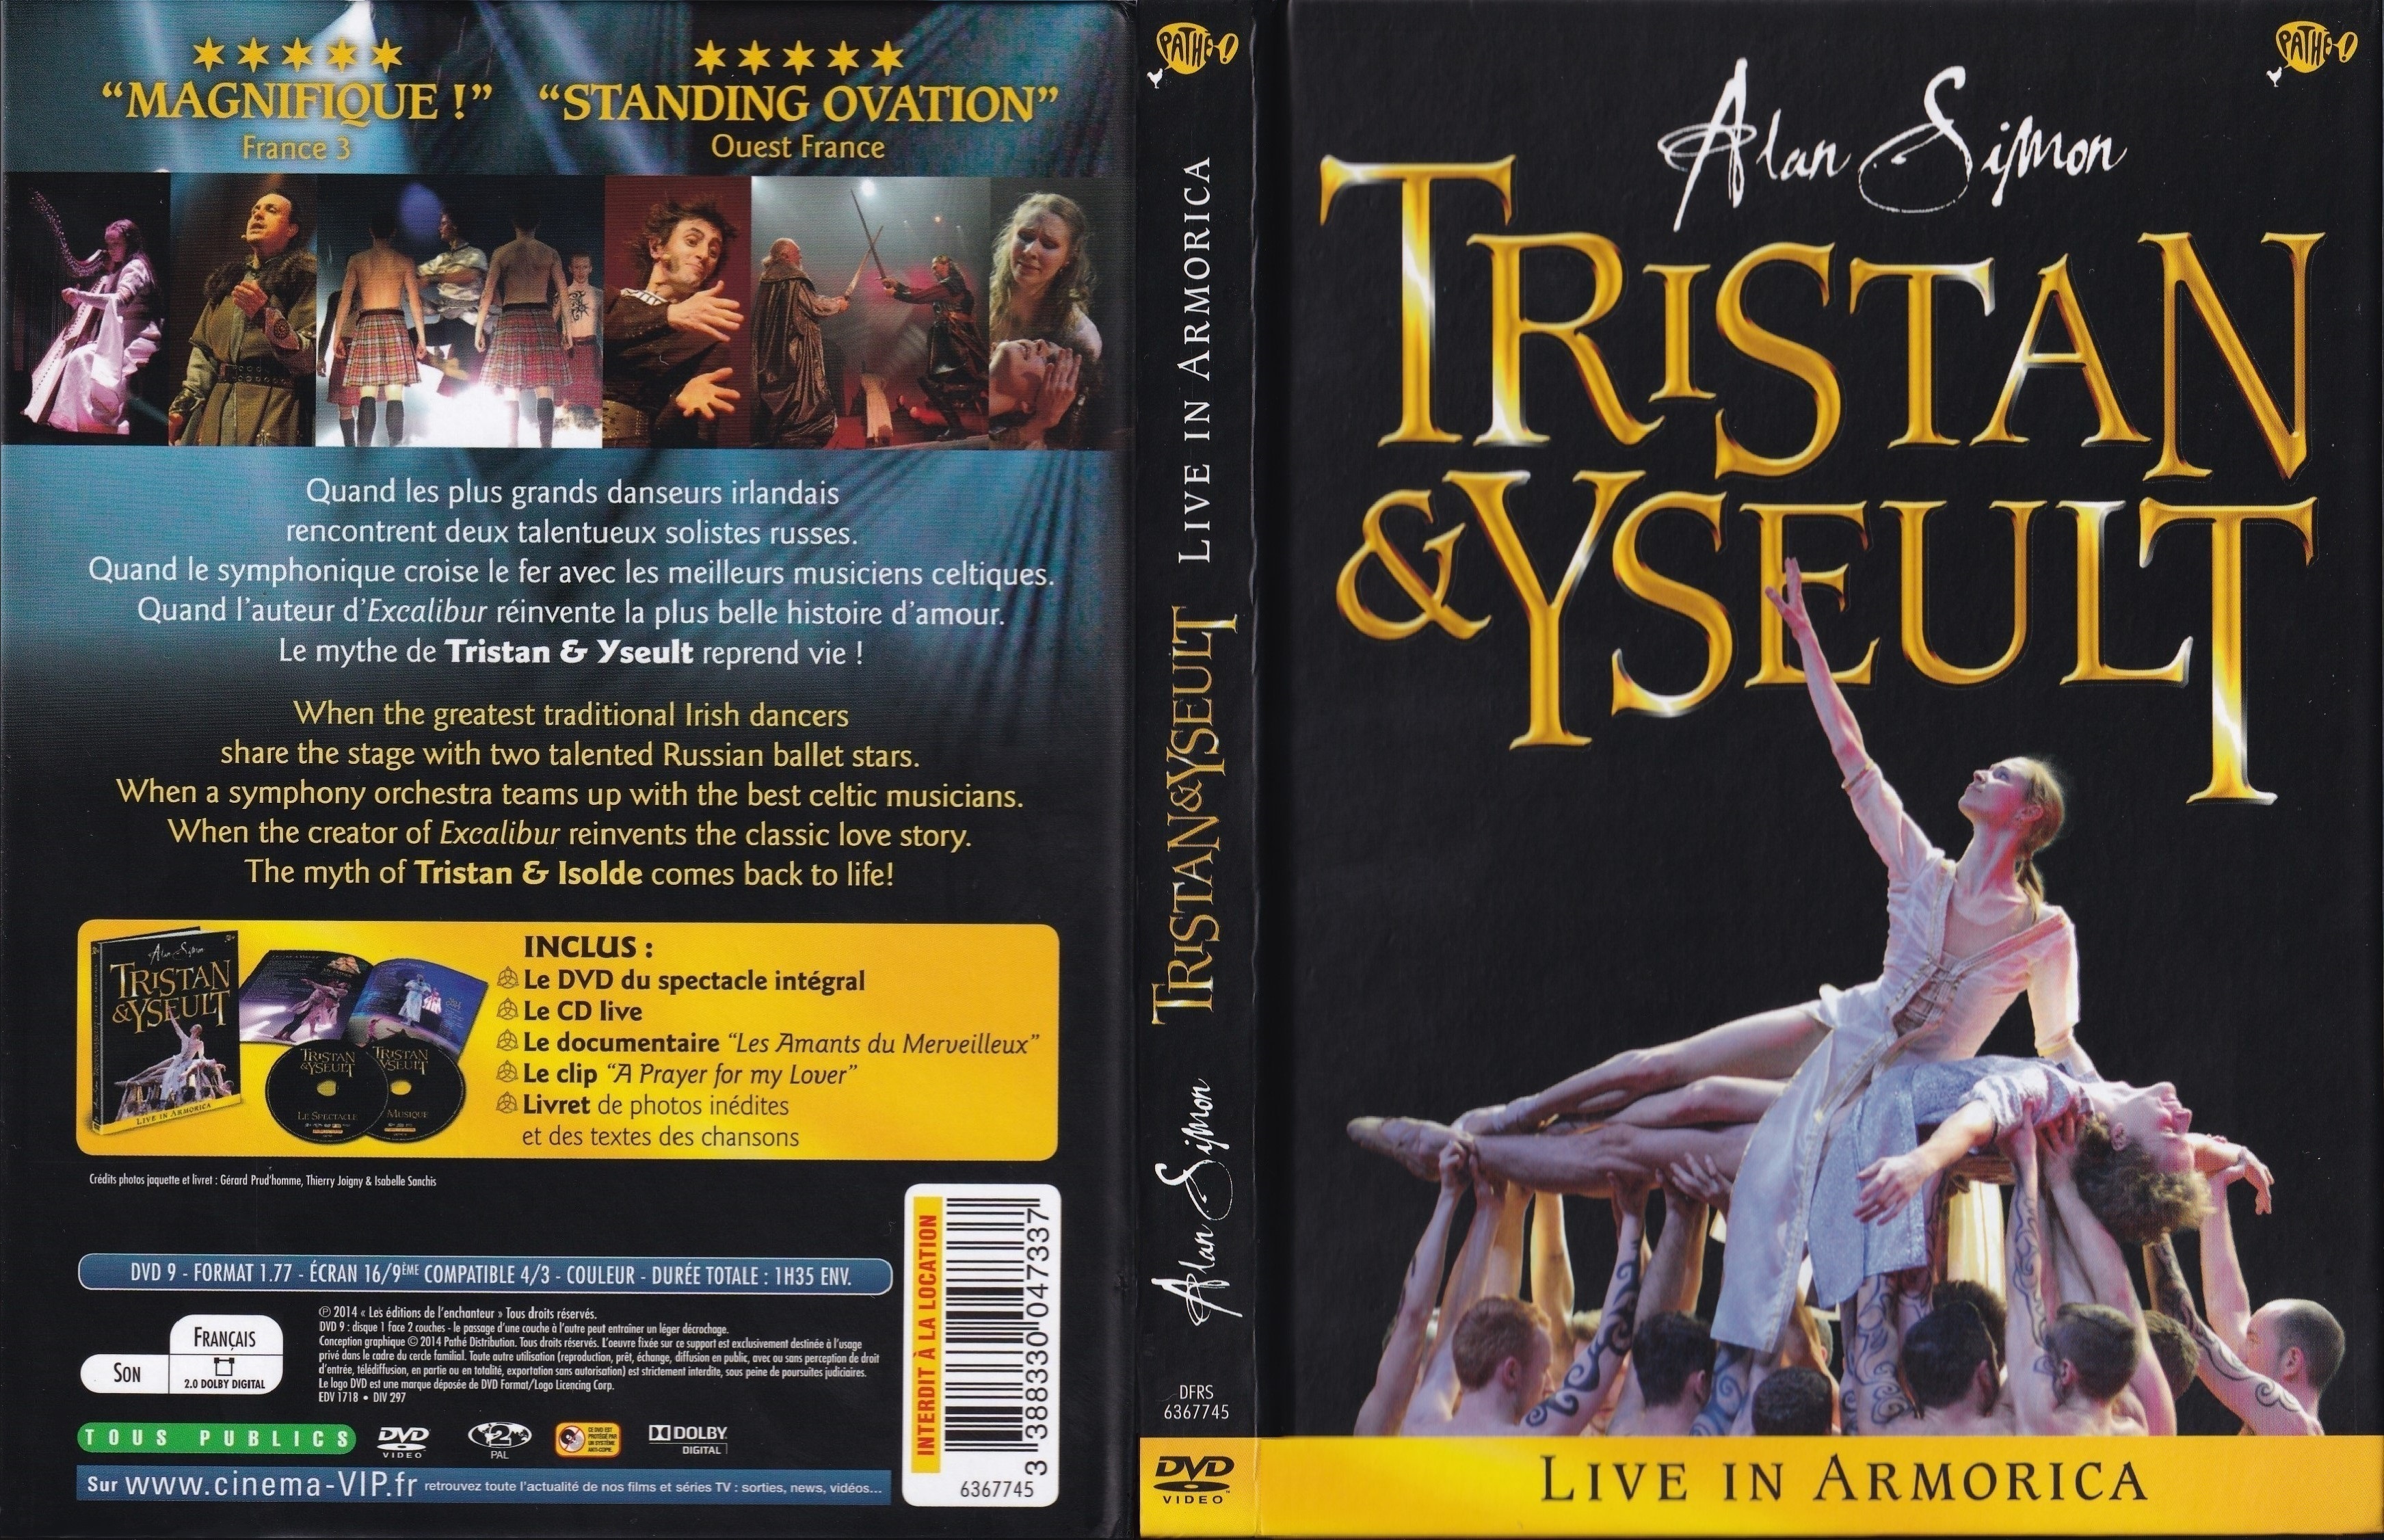 Jaquette DVD Tristan & Yseult - Live in Armorica